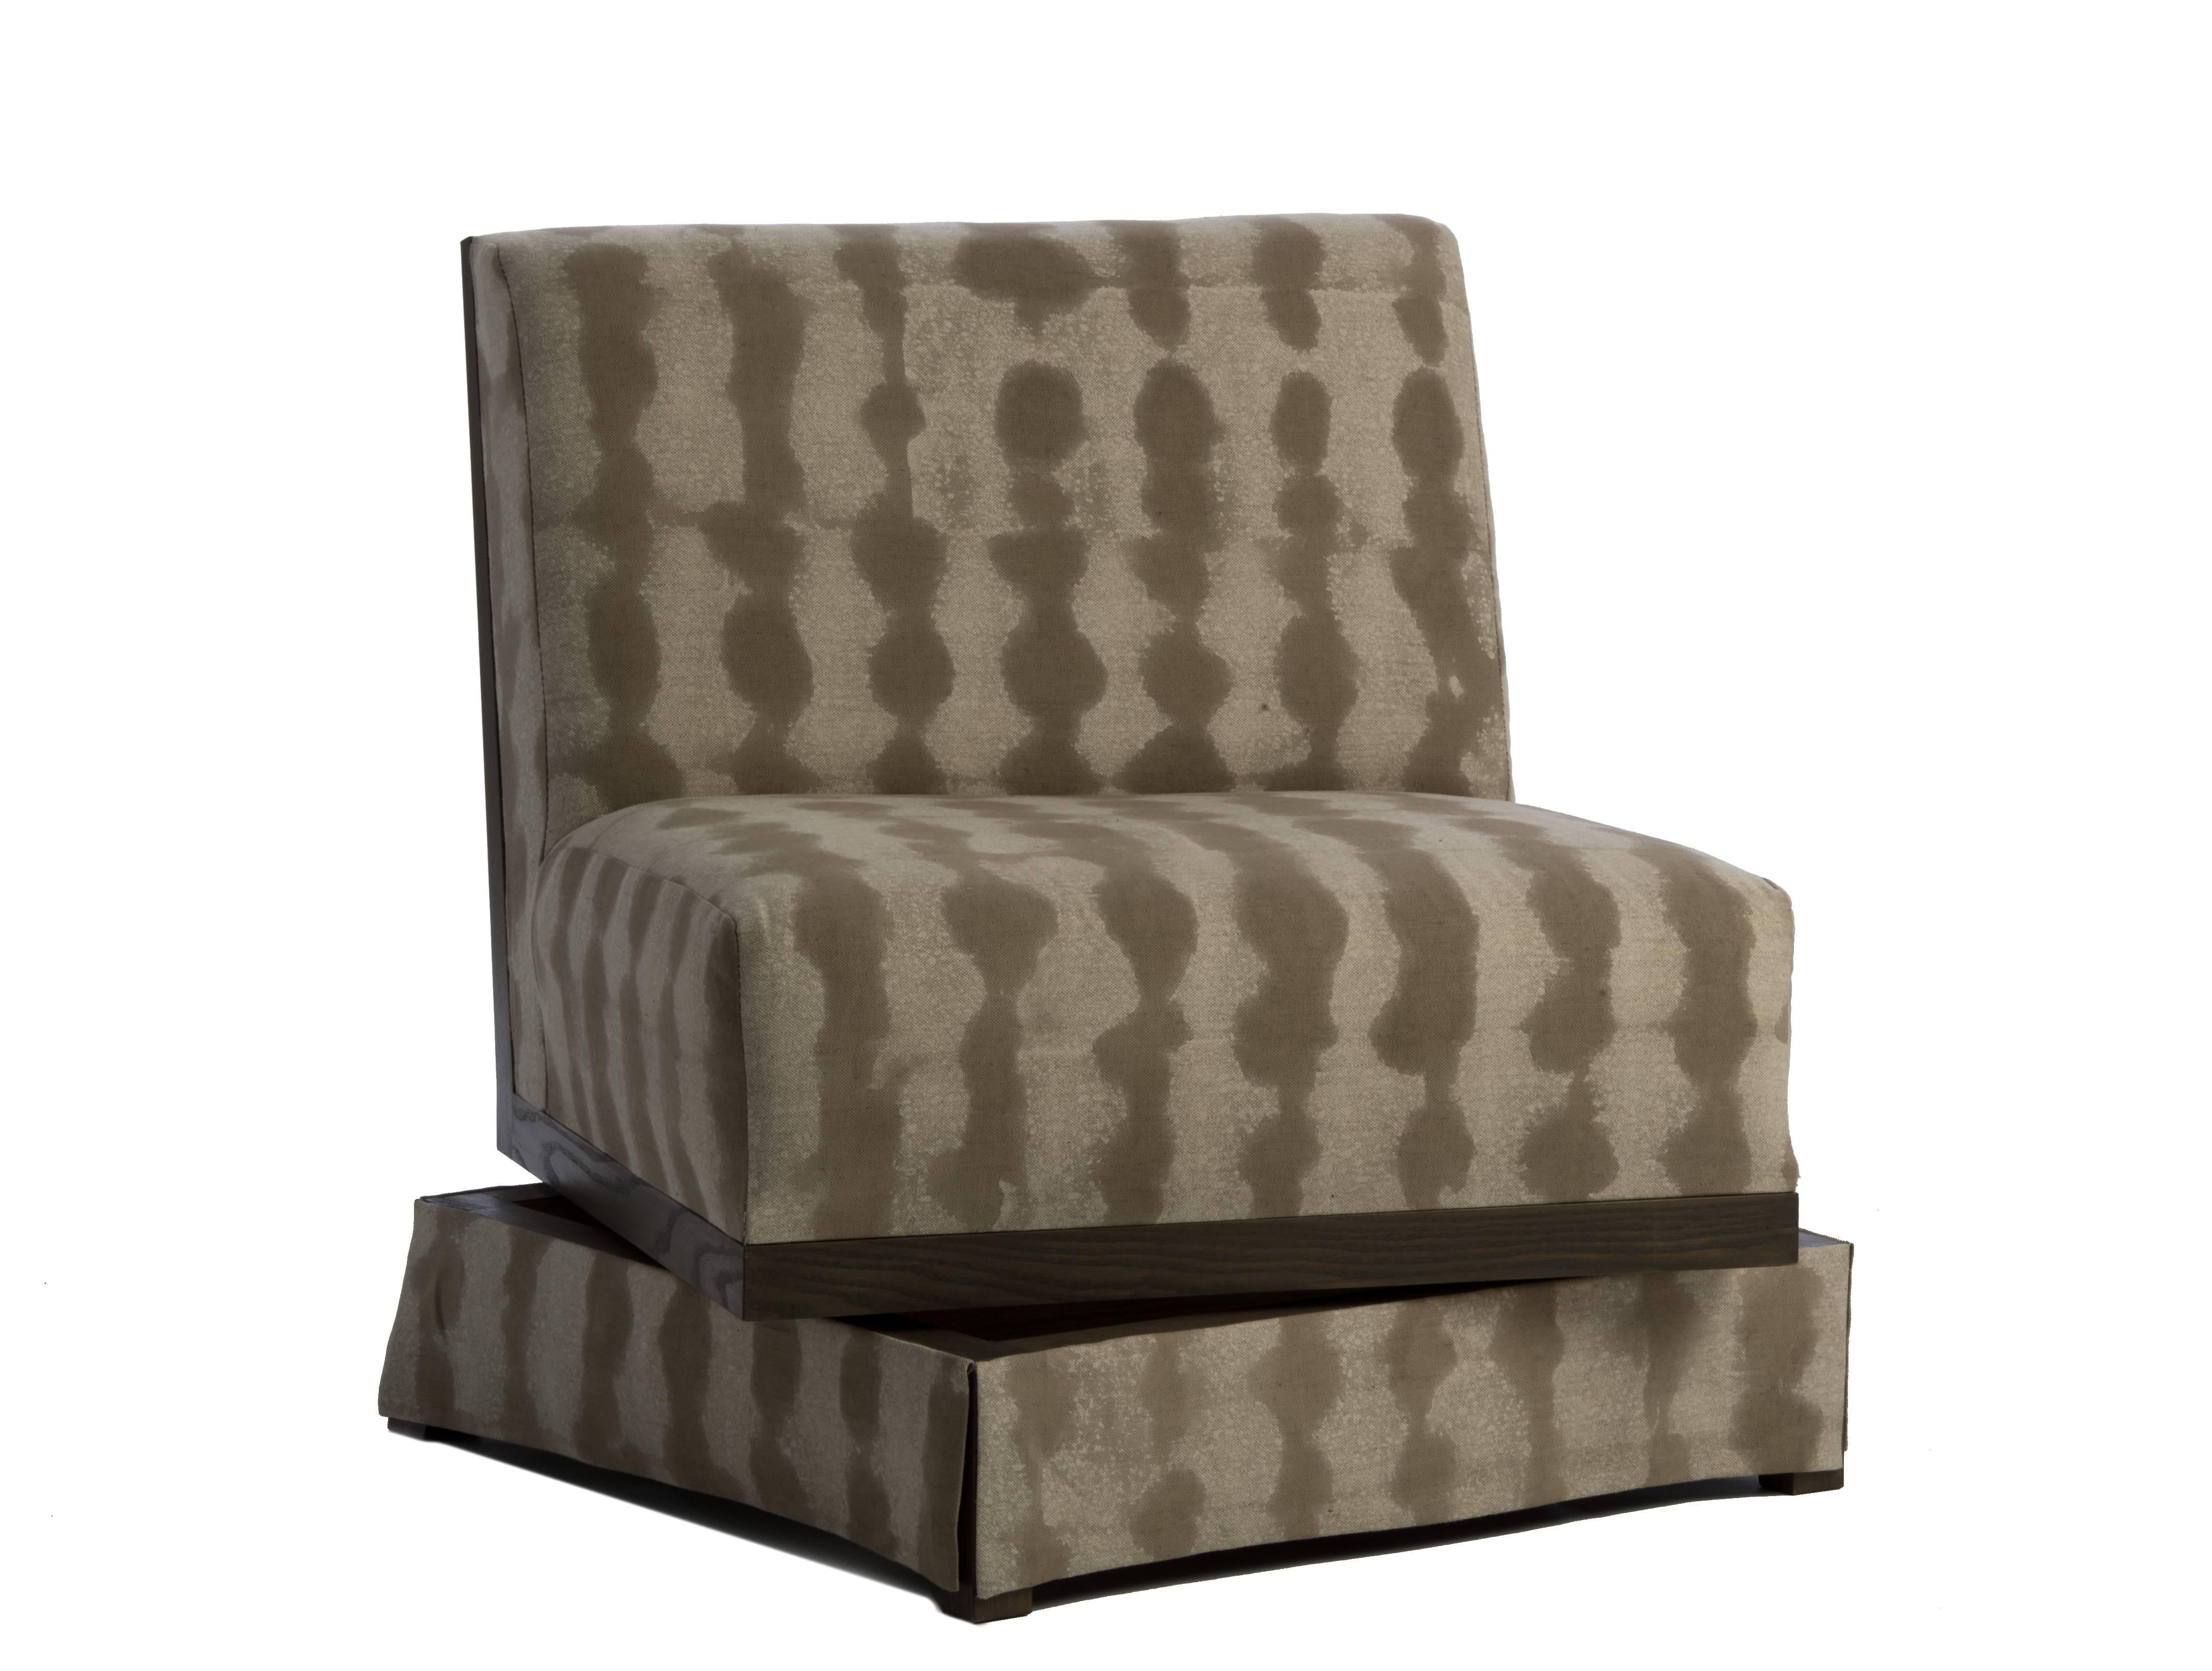 Designed by Ashley Yeates, handmade in the United States, a maximized seat space with open comfort, the armless swivel highlights North American ashwood details on the seat back and is the perfect complement to traditional and contemporary spaces